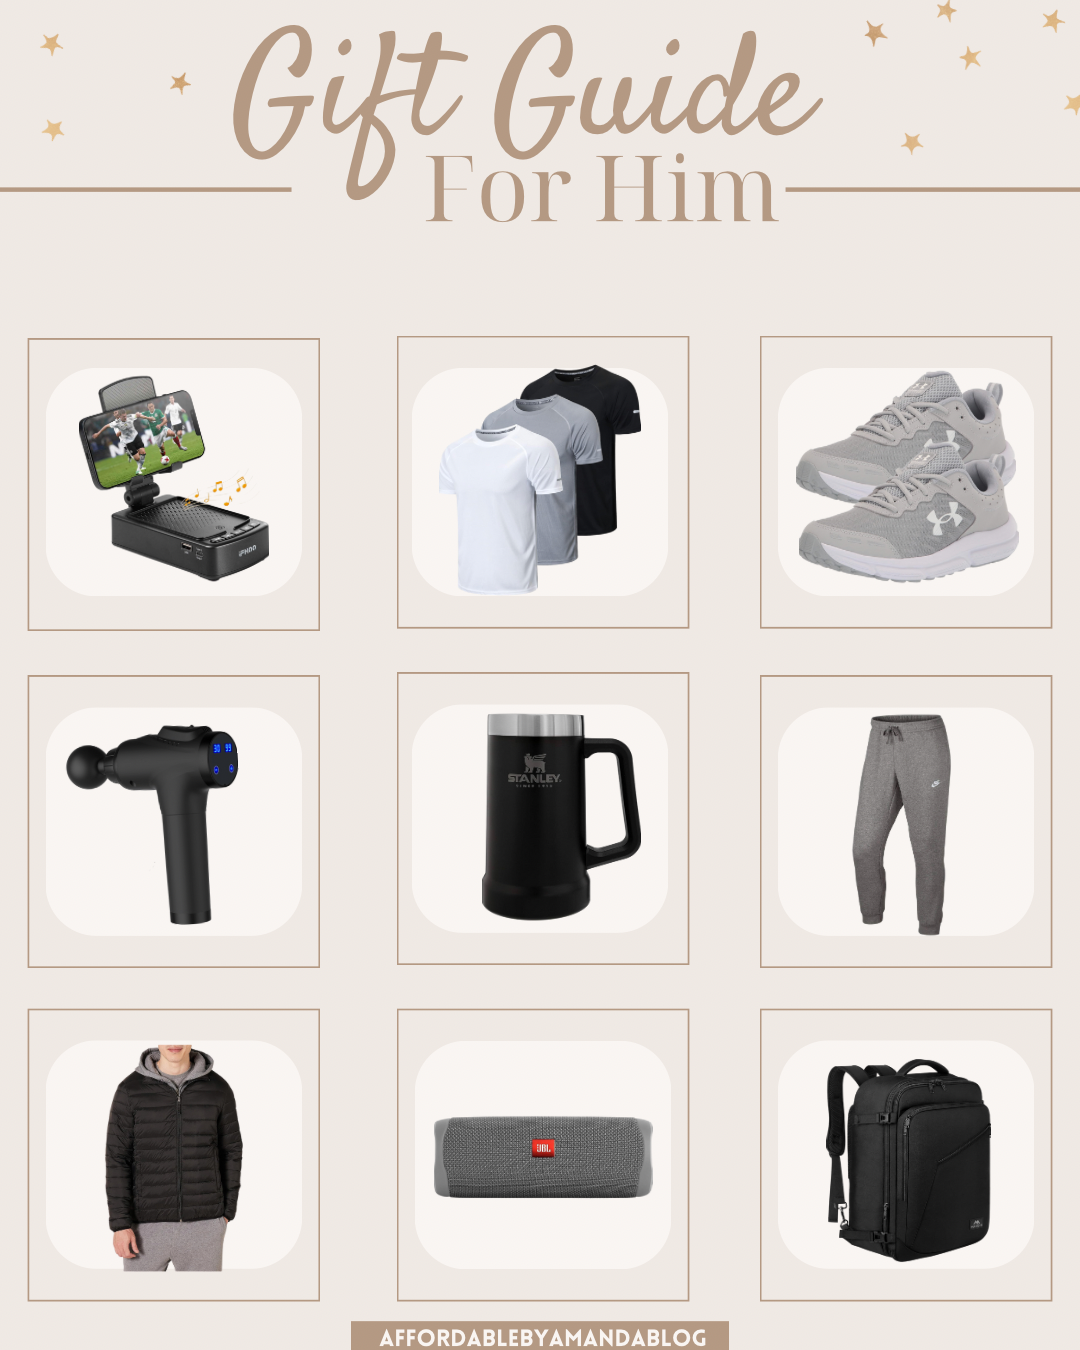 Holiday Gifts for Men. Amazon Gifts for Dad. Amazon Gift Ideas for Boyfriend. Gifts for Husbands. Gifts for Men Under $100